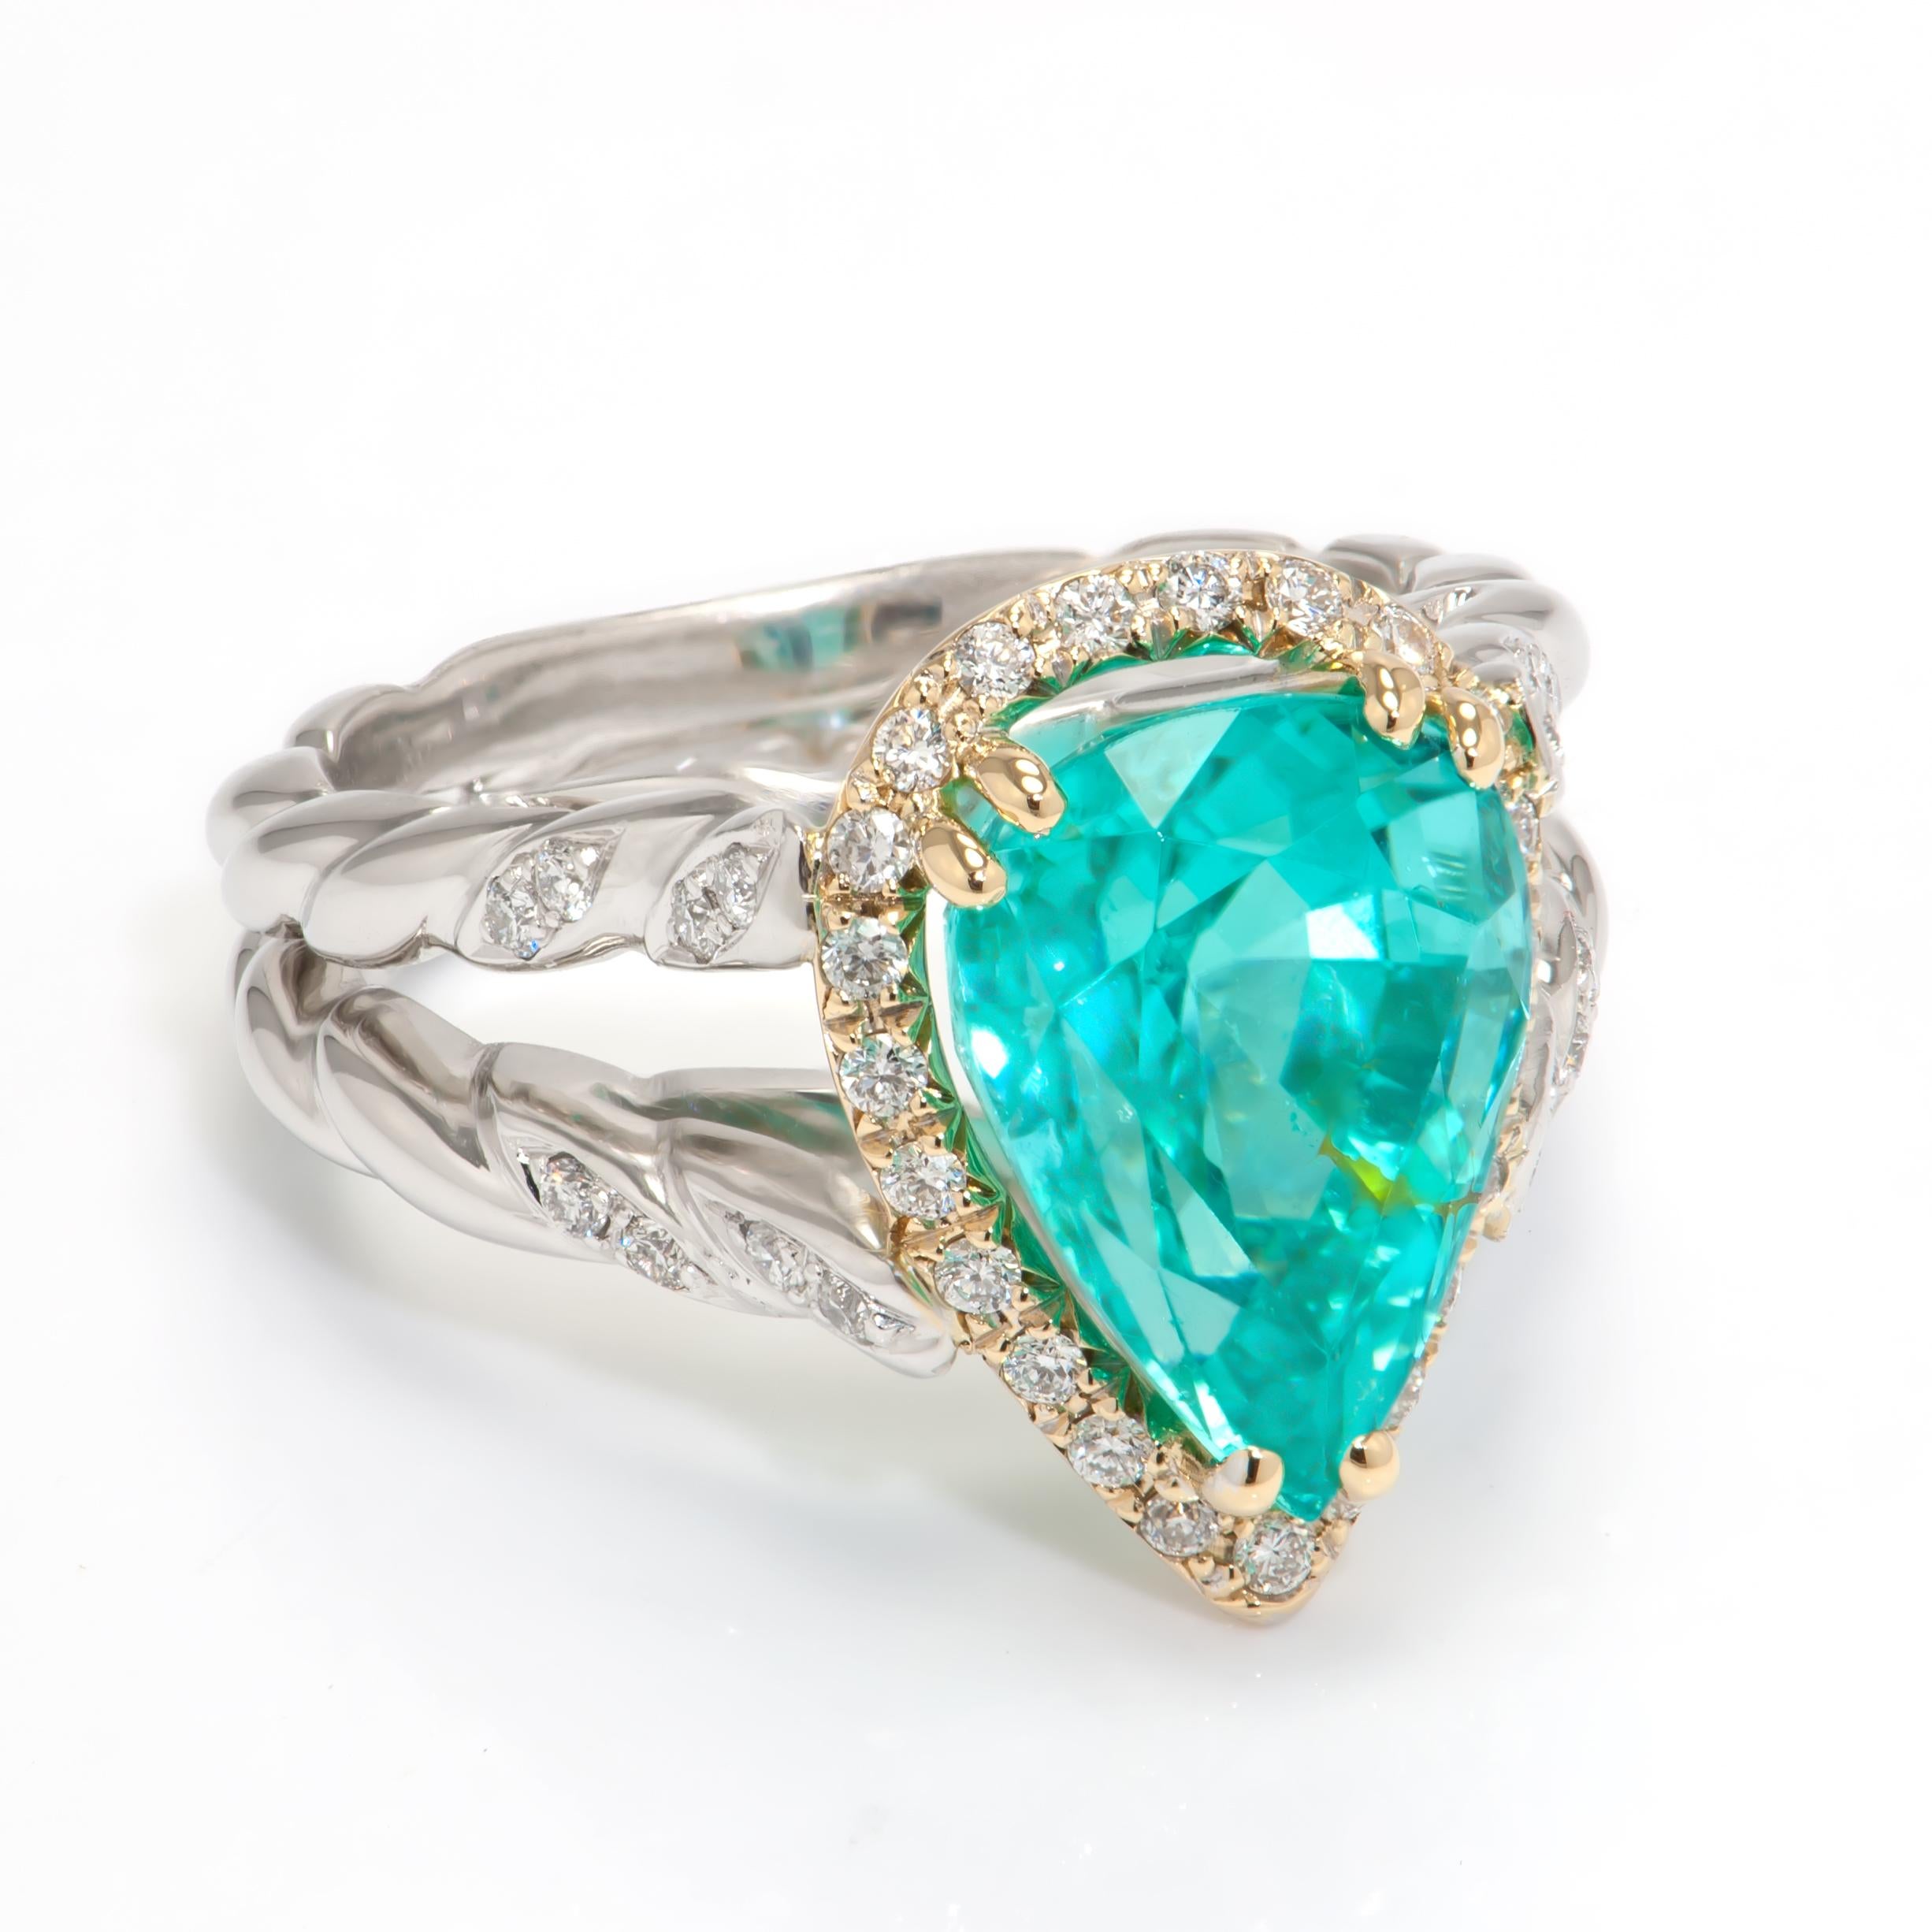 Magnificent Paraiba Tourmaline and Diamond Cocktail Ring. Centering a Beautiful 5.09ct Pear shaped Paraiba Tourmaline; measuring approx. 12.06mm x 9.10mm x 7.60mm surrounded by 23 round brilliant cut diamonds, 0.22tctw. Hand crafted in Platinum and